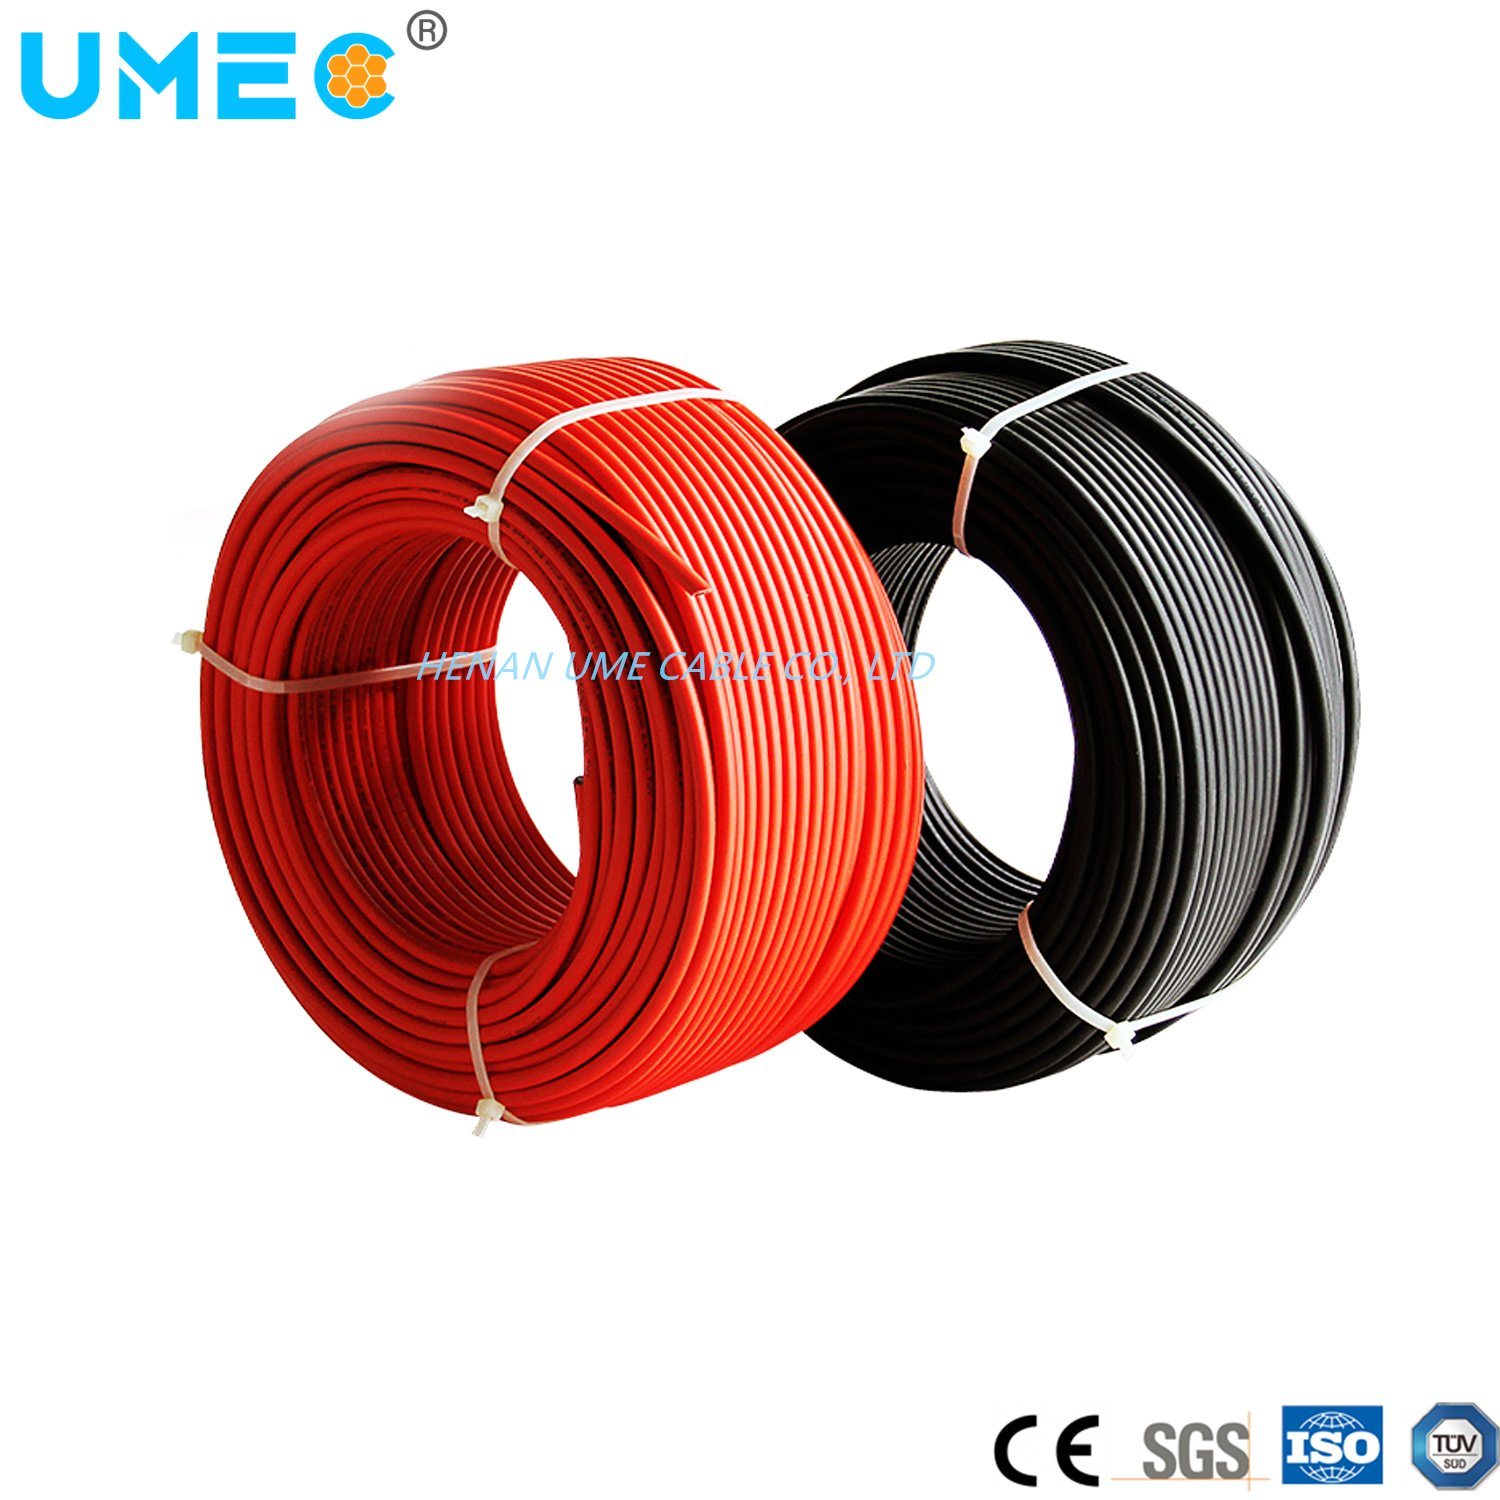 PTFE Insulated High Temperature Wire Afr-250